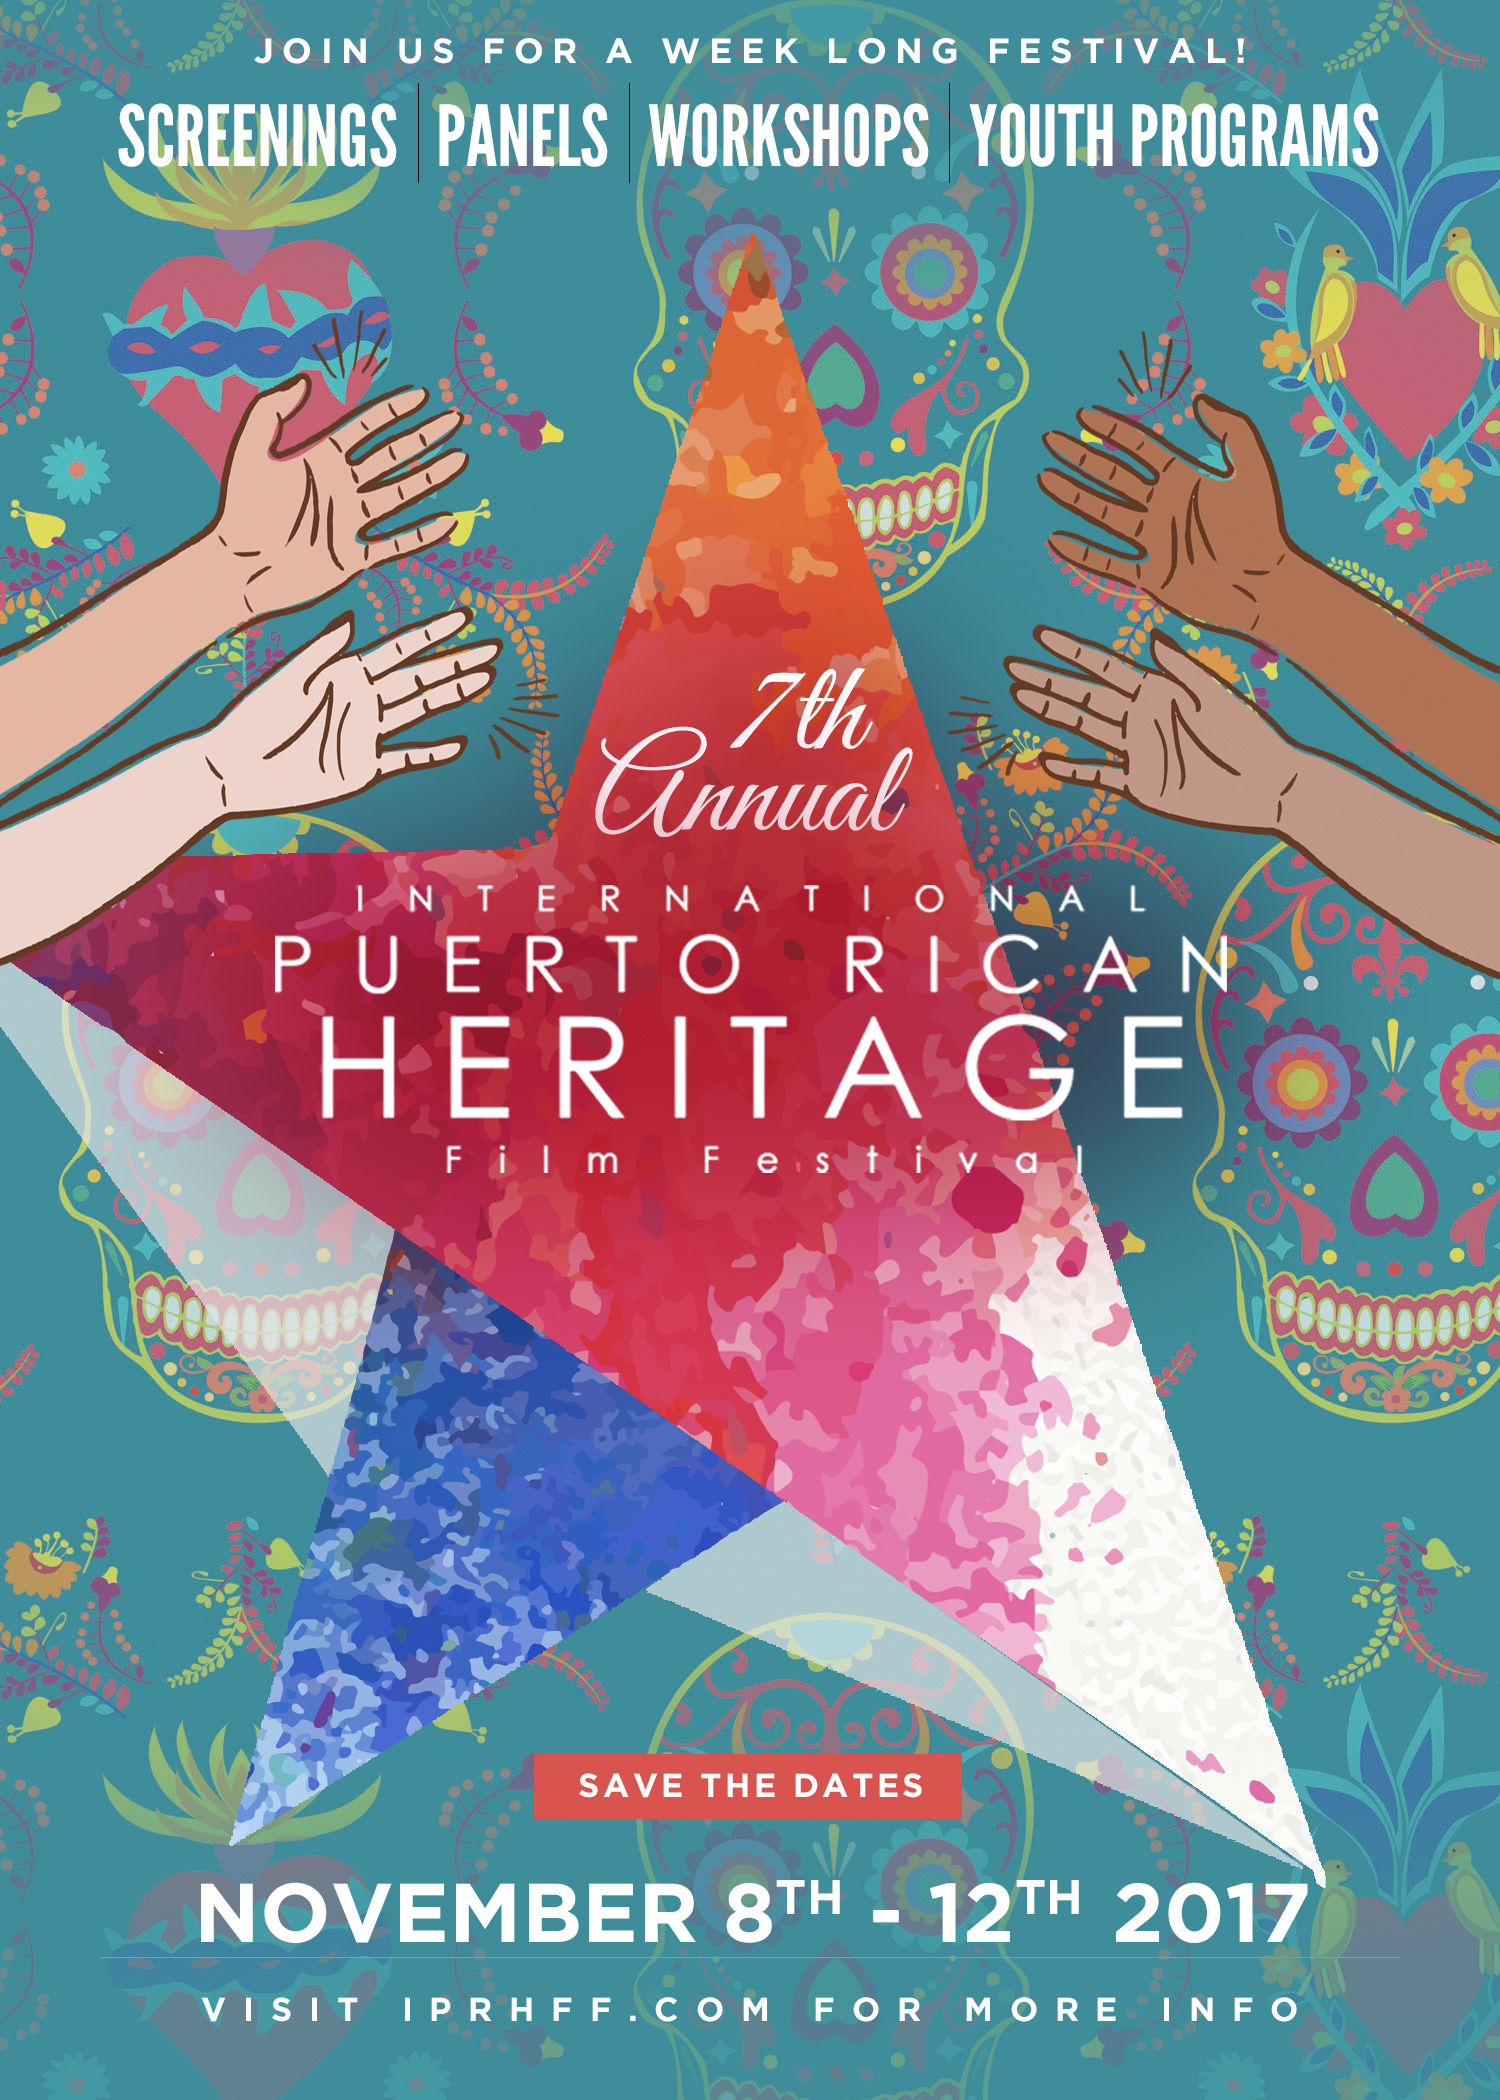 A Girl From Mexico - 7th Annual International Puerto Rican Heritage Film Festival